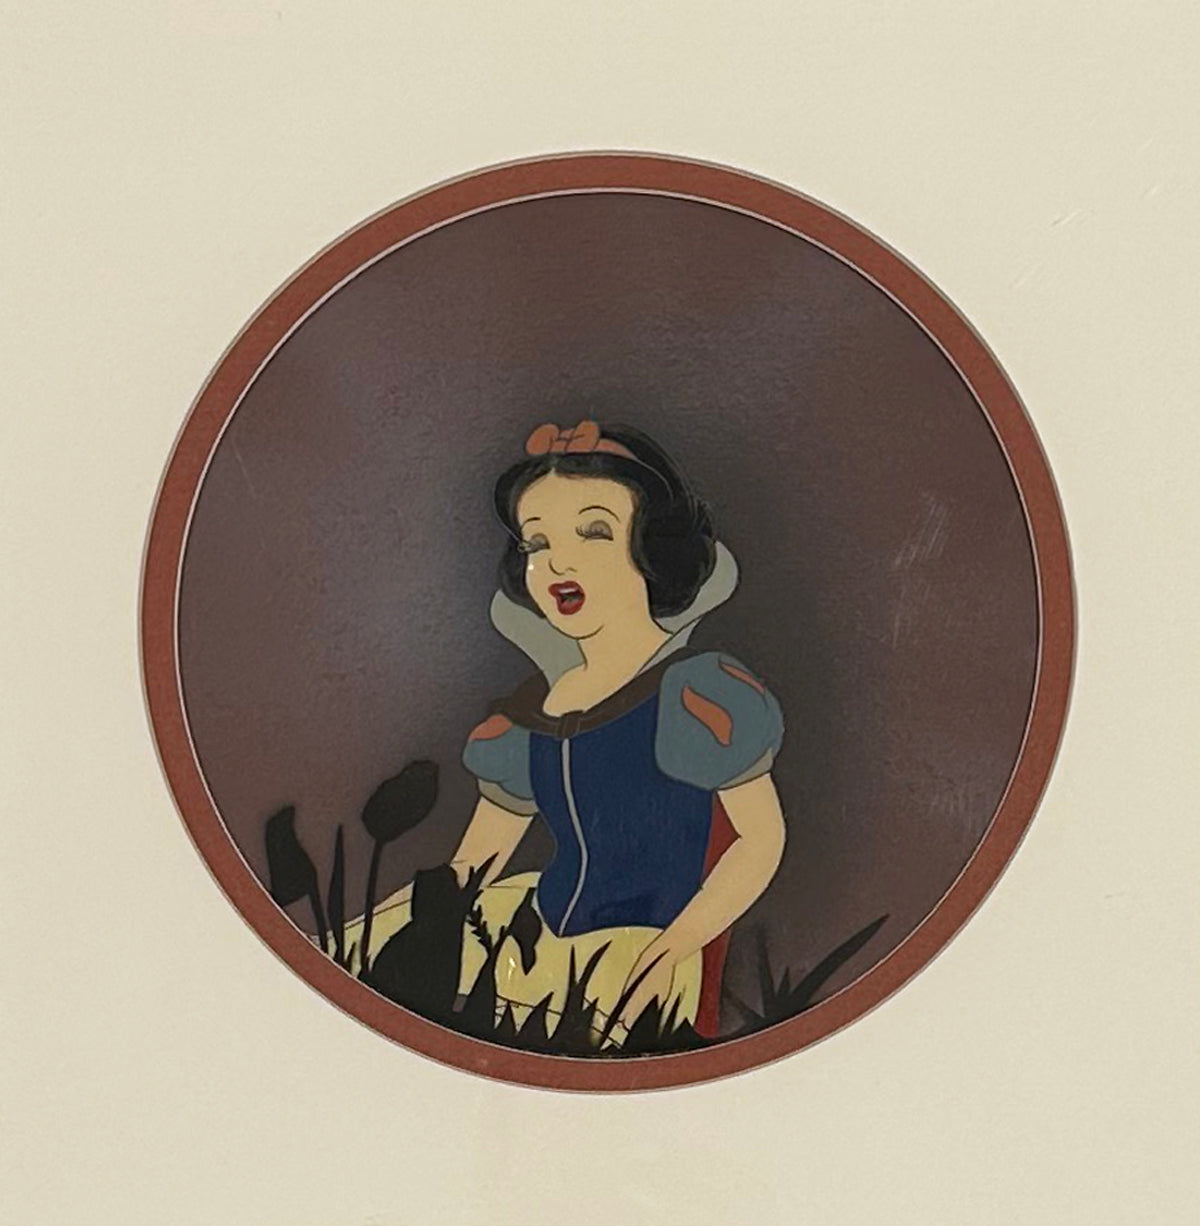 Original Walt Disney Production Cel from Snow White and the Seven Dwarfs featuring Snow White